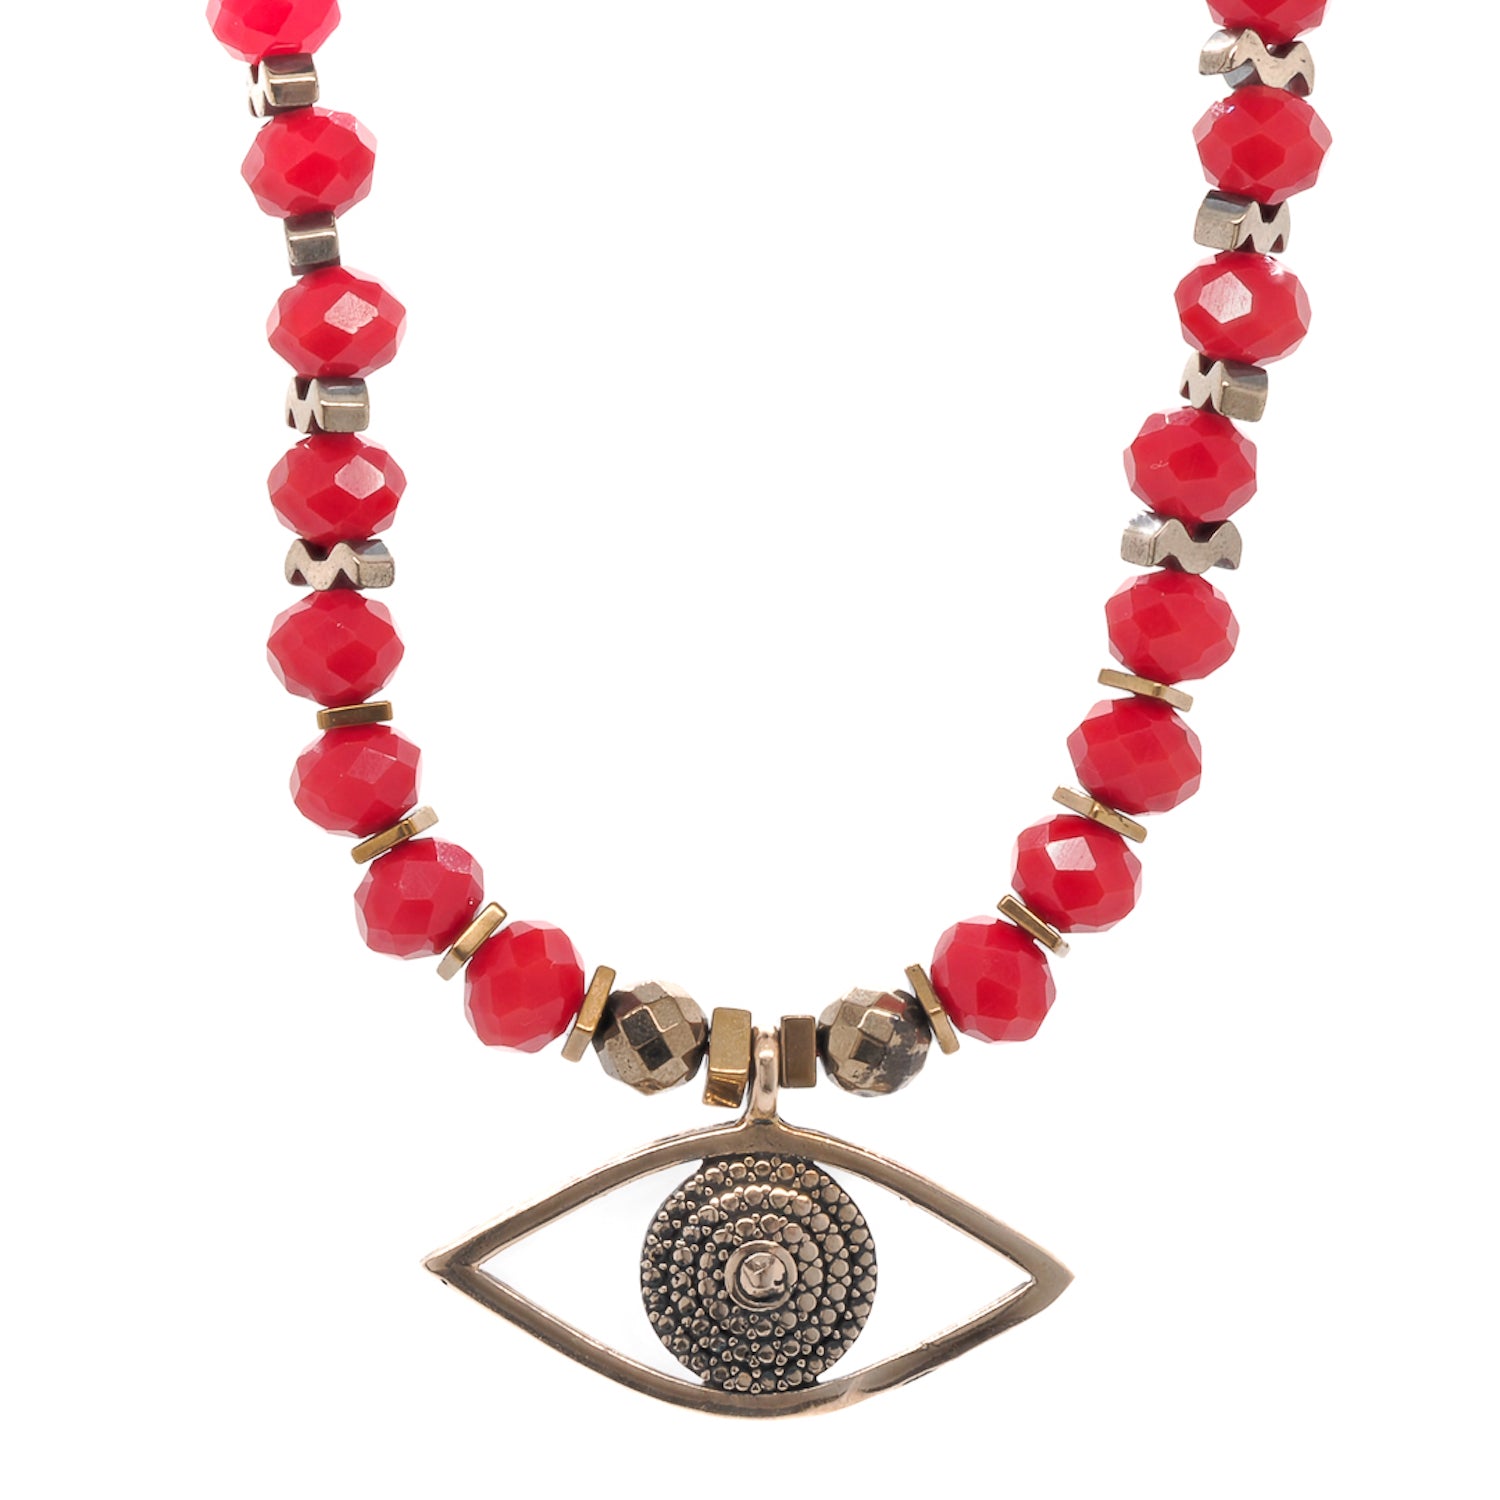 Handmade jewelry piece, the Christmas Evil Eye Necklace, designed with care and meaning, combining the power of the Evil Eye and the vibrant red color.